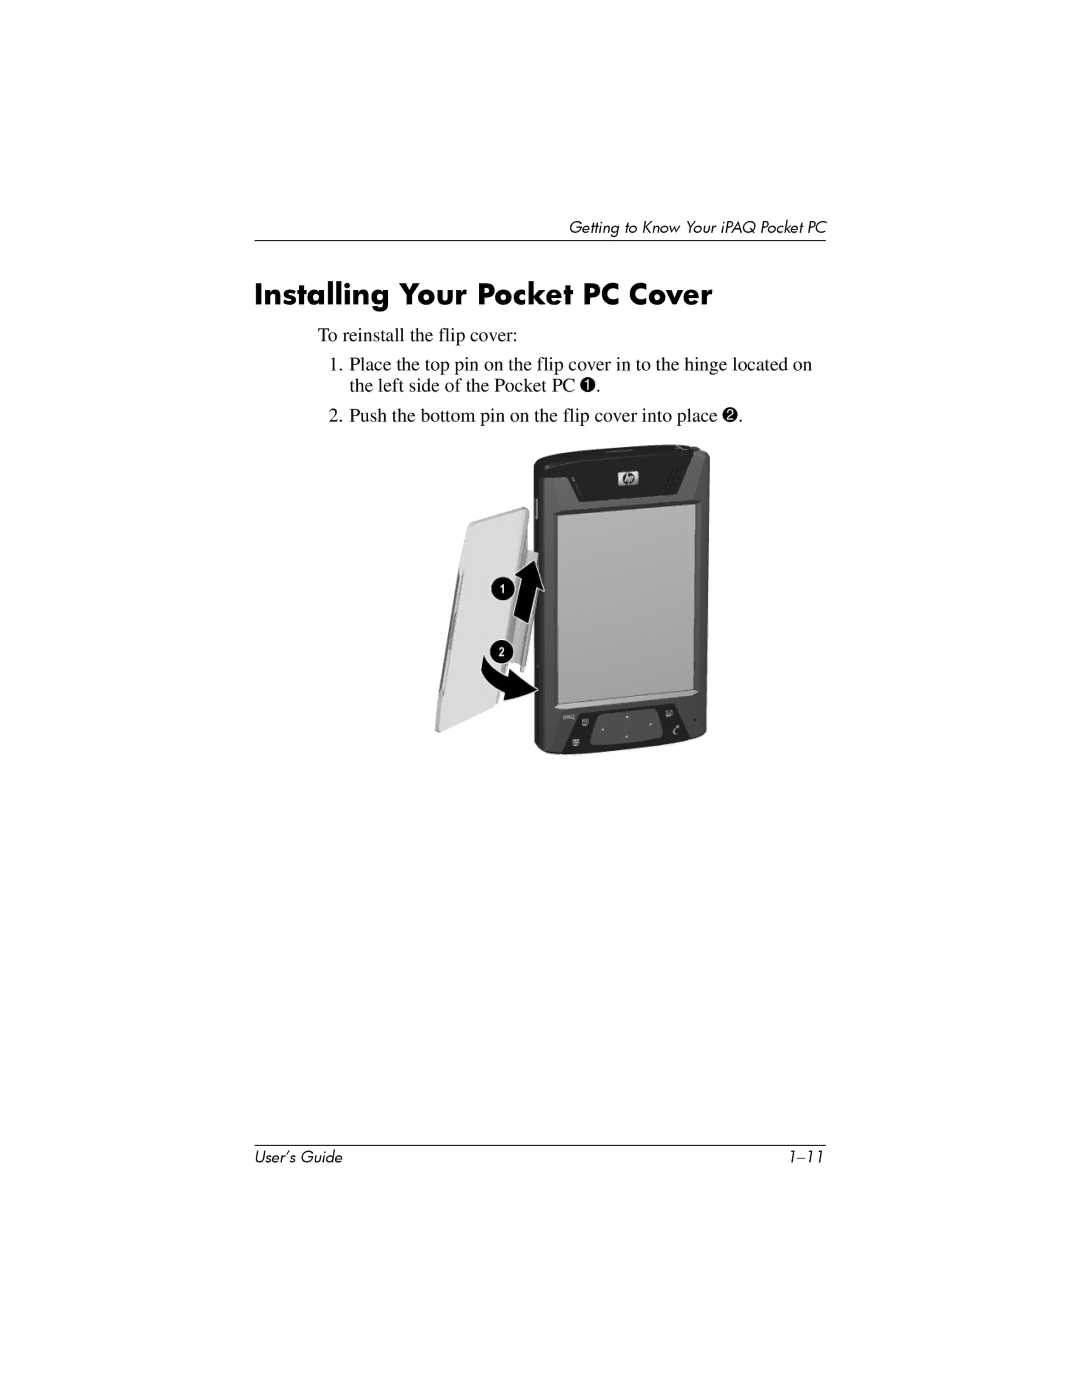 HP hx4700 manual Installing Your Pocket PC Cover 